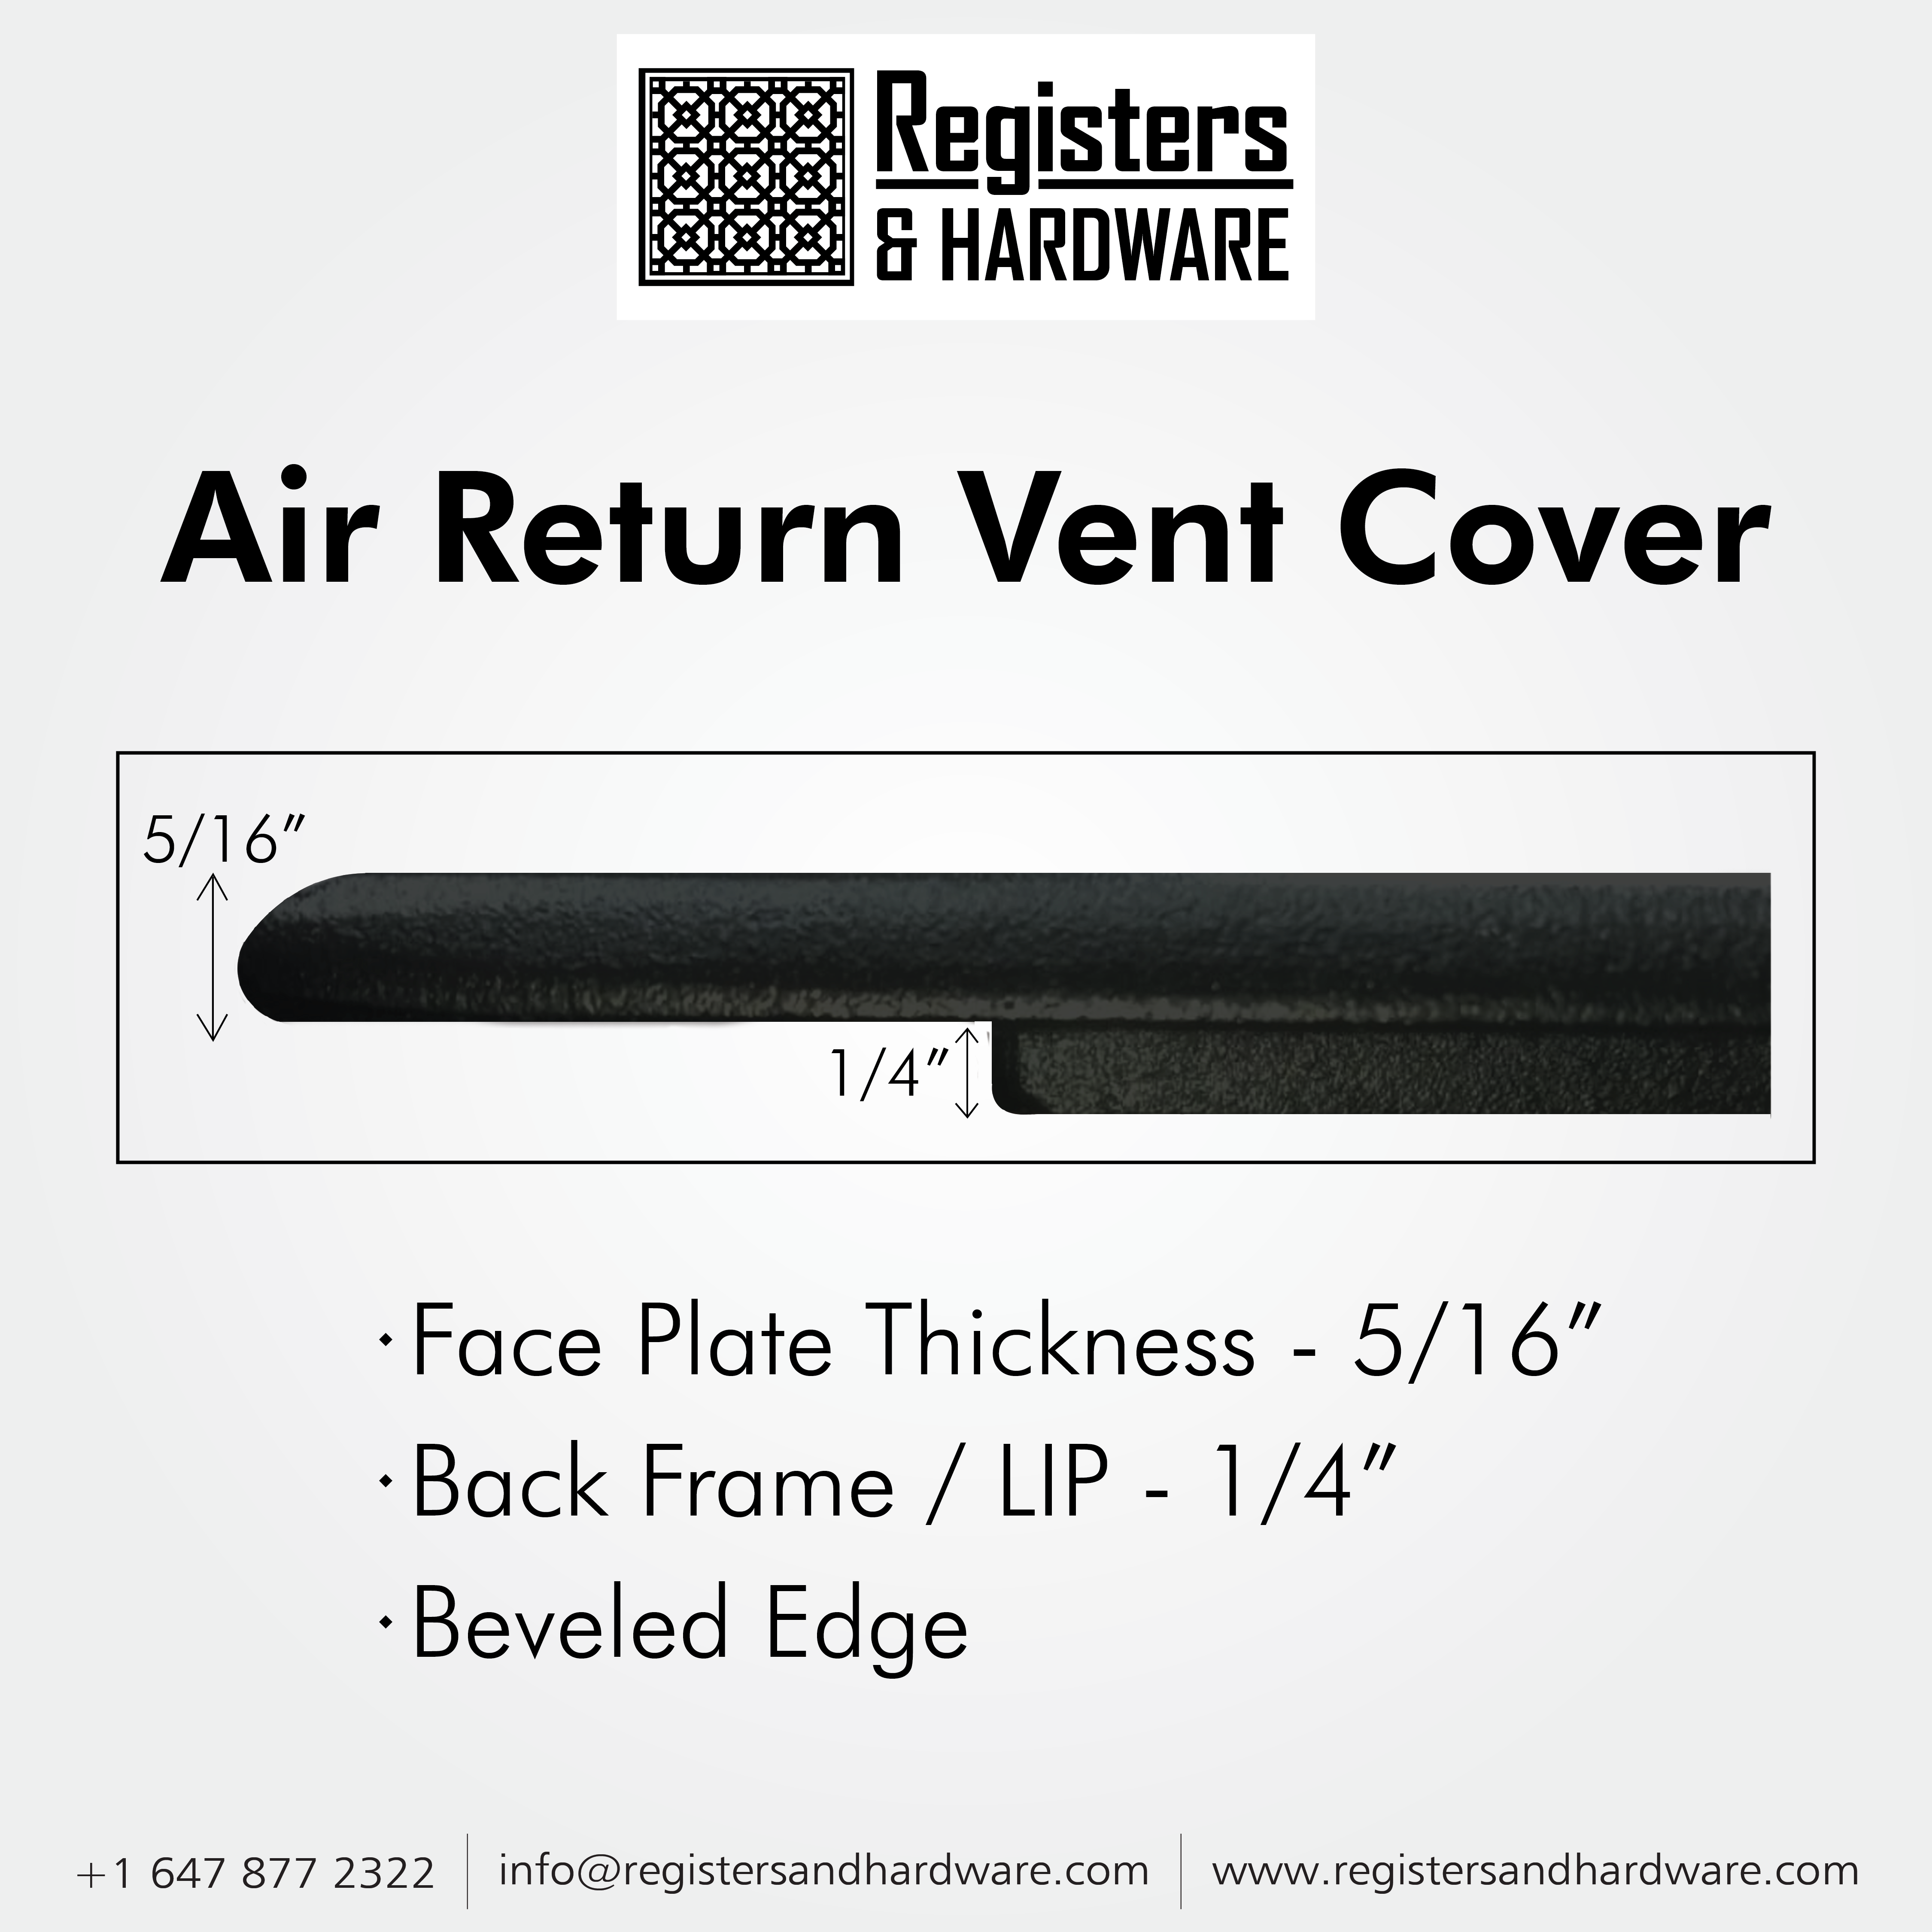 Achtek AIR RETURN 13"x13" Duct Opening (Overall Size 15"x15") | Heavy Cast Aluminum Air Grille HVAC Duct || Powder Coated